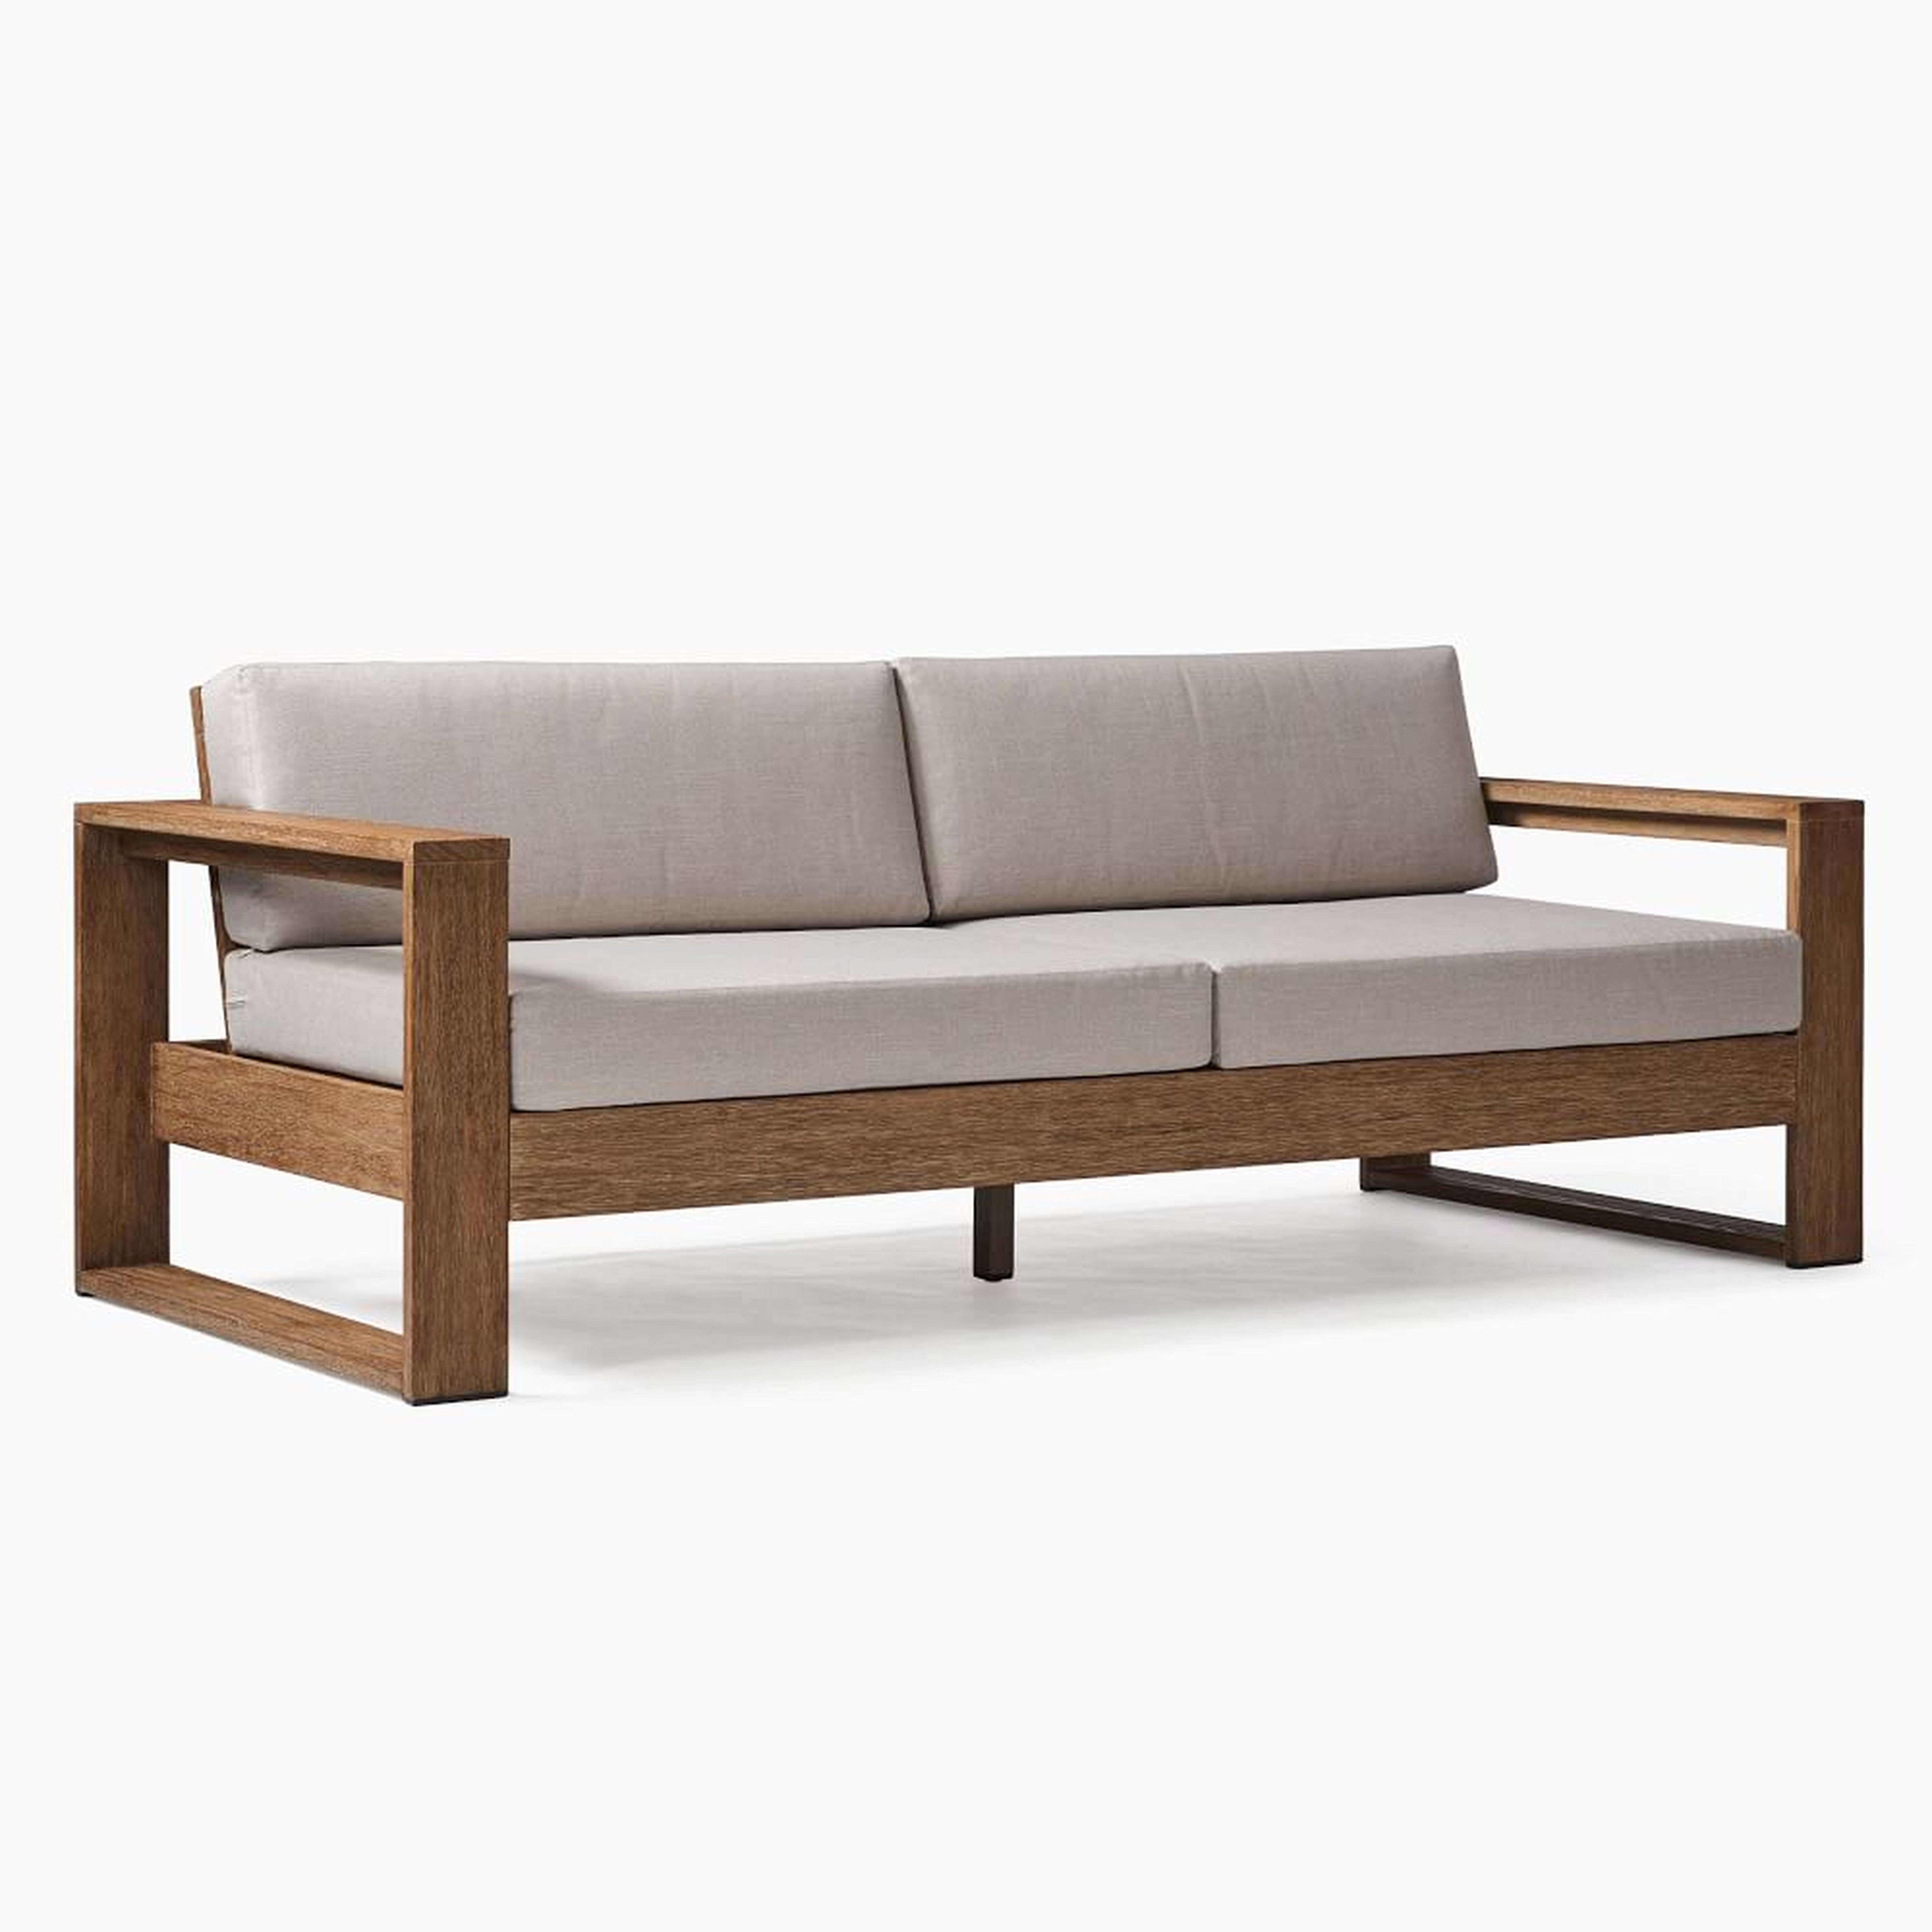 Portside Outdoor 85 in Sofa, Driftwood - West Elm